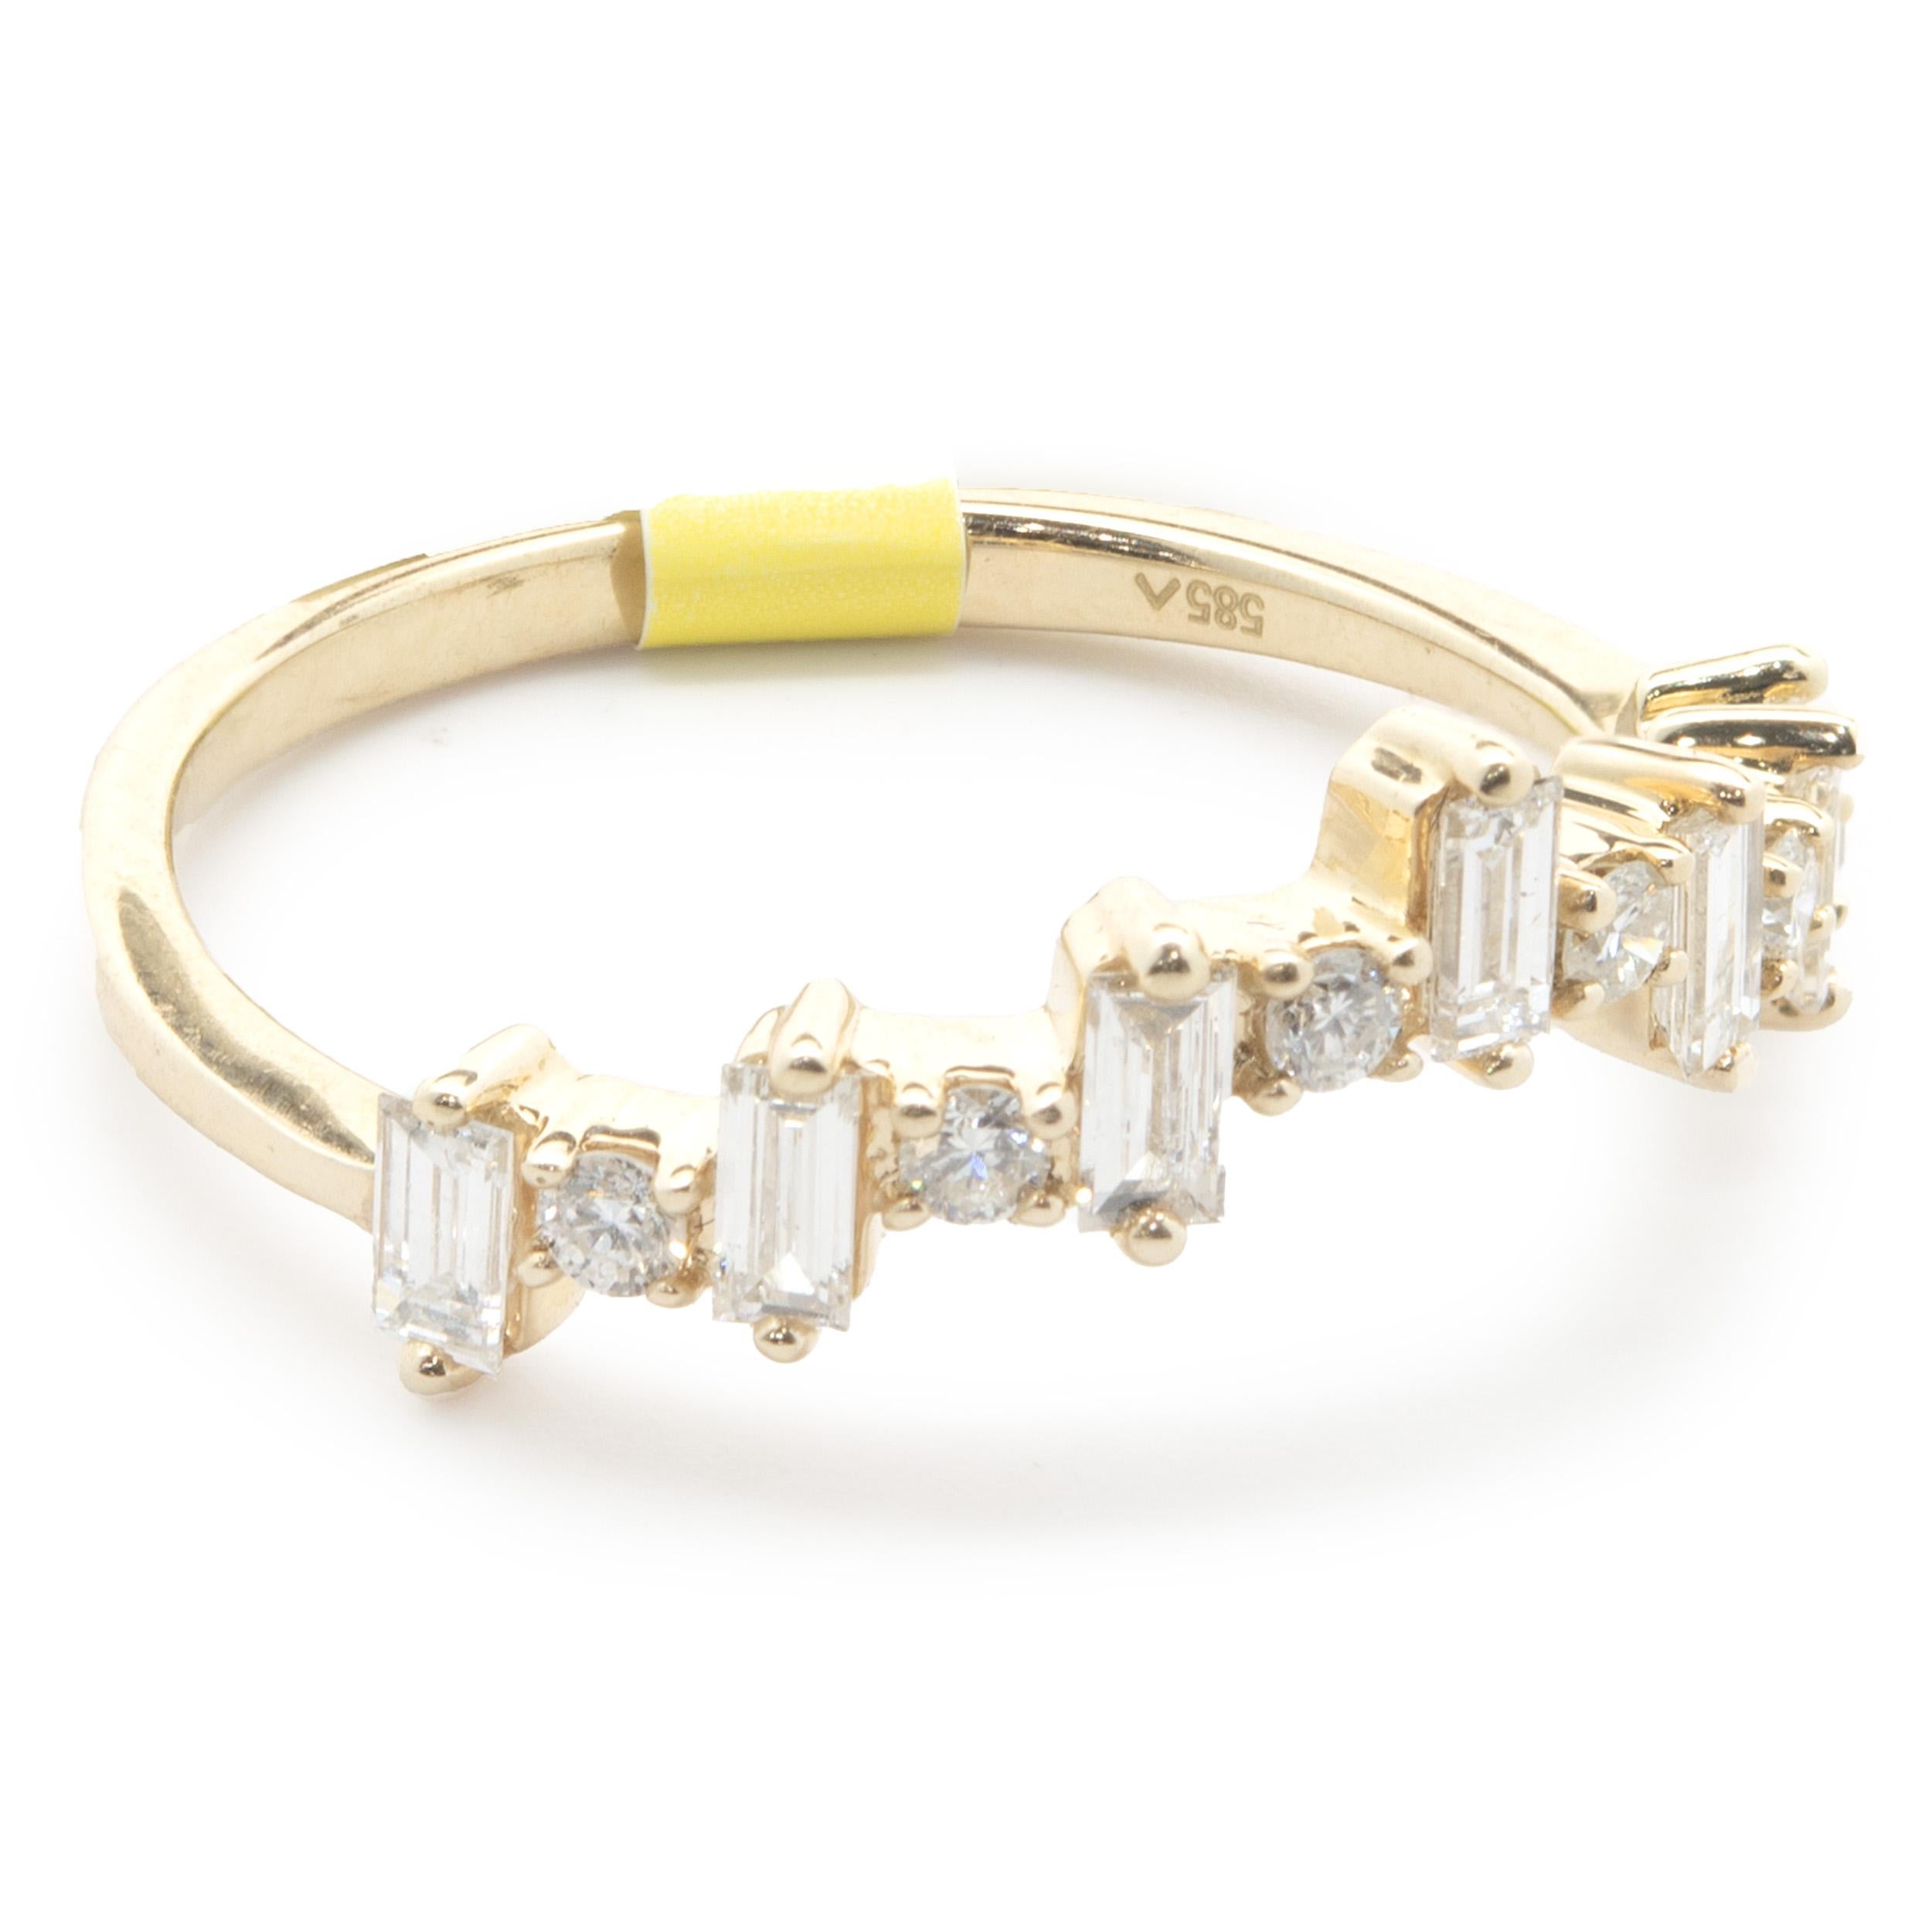 Designer: Custom
Material: 14K yellow gold
Diamond: 6 round brilliant & 7 baguette cut = 0.54cttw
Color: G
Clarity: SI1
Size: 7 (complimentary sizing available upon request)
Weight: 2.15 grams